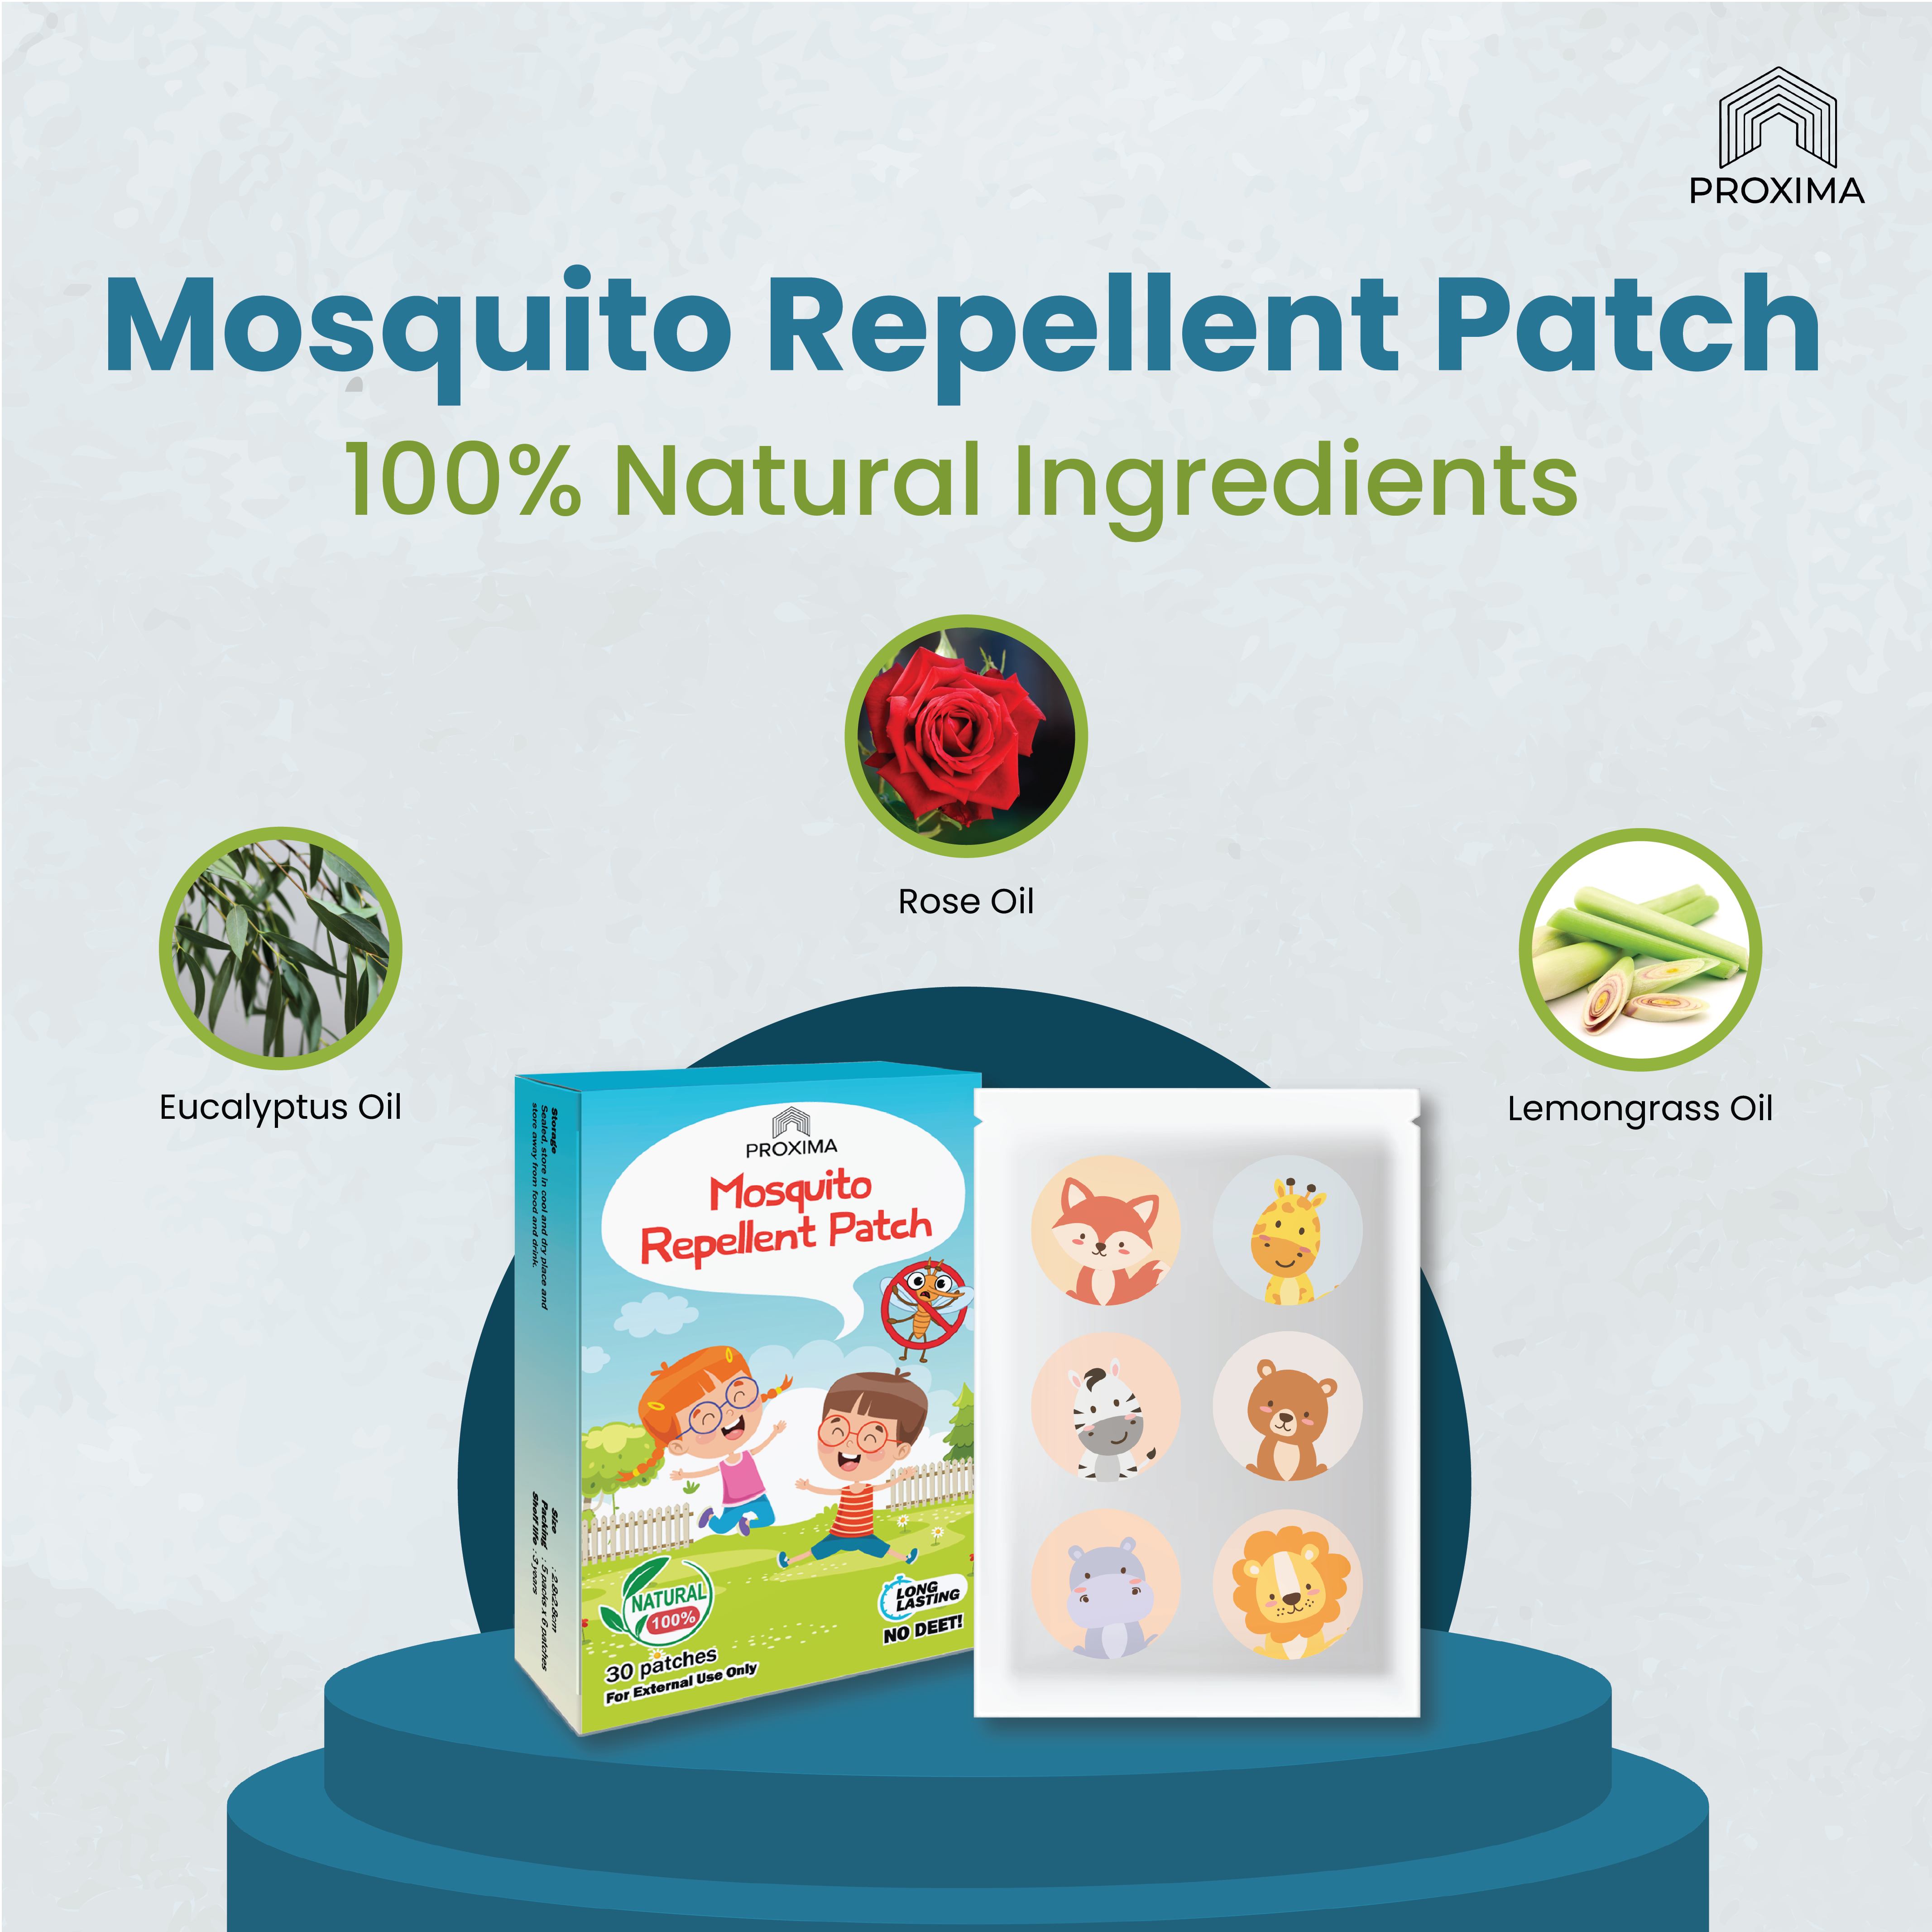 Mosquito Repellent Patch Shopee Posting LATEST-02